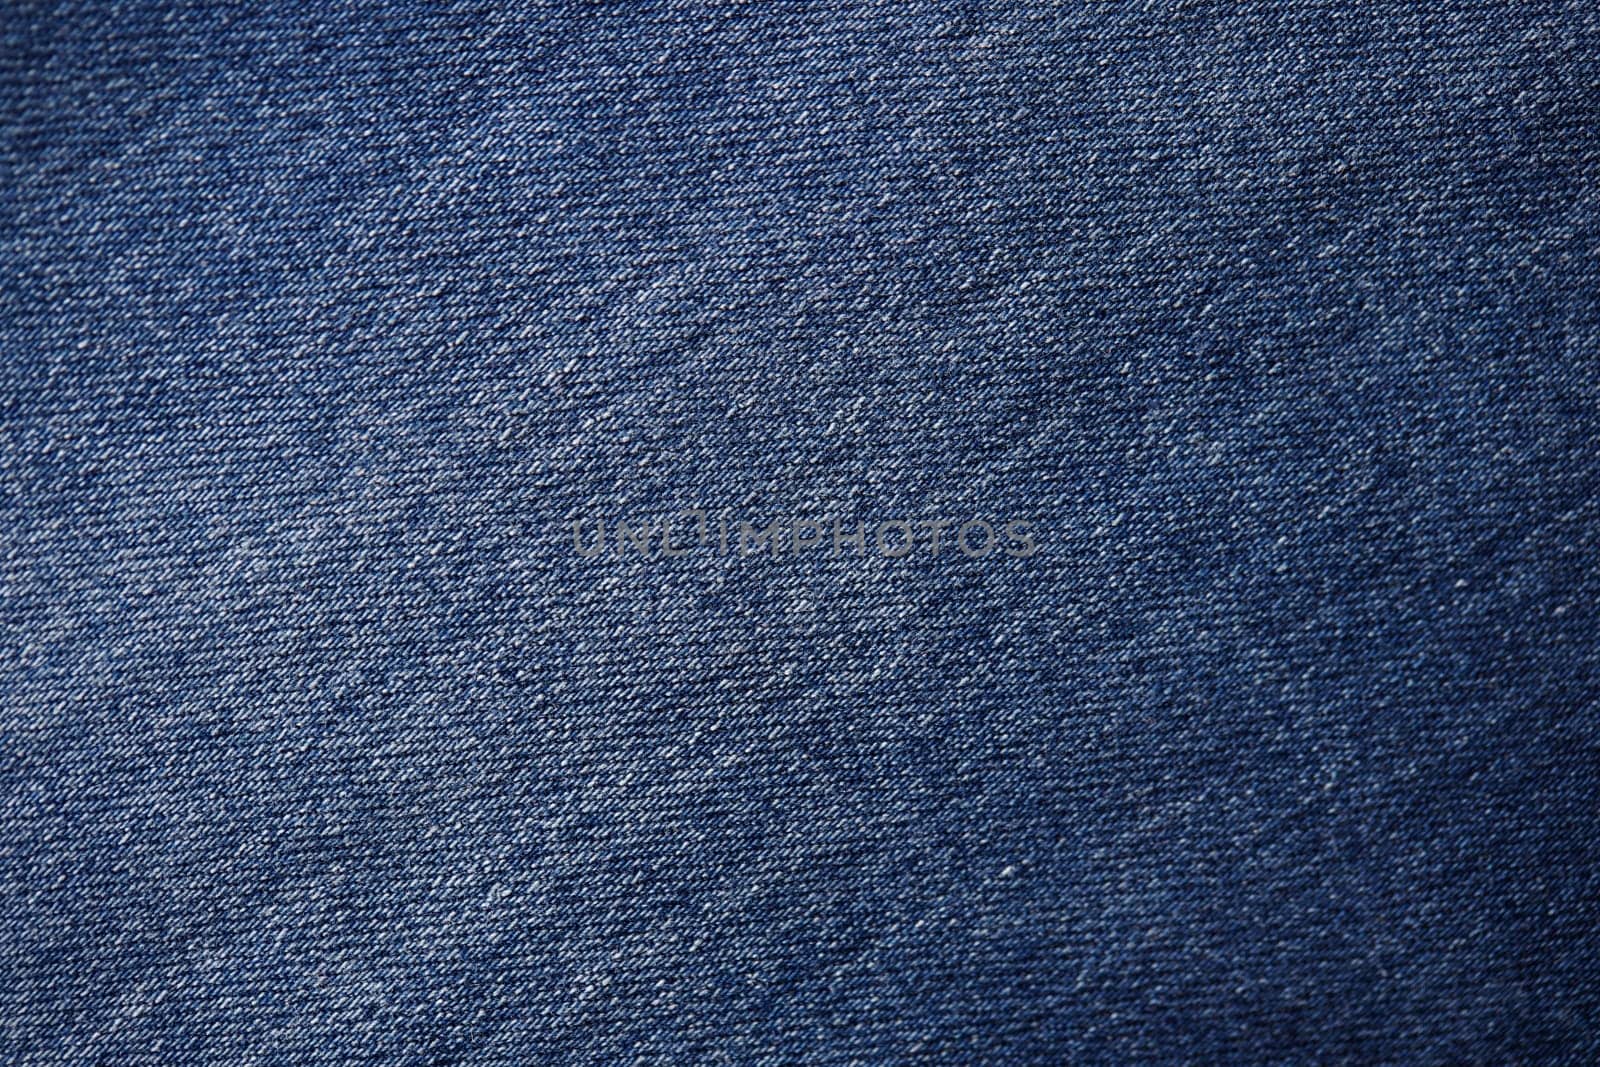 Fabric texture. Blue jeans background and texture. Close up of blue jeans background. Denim texture in high-resolution by EvgeniyQW